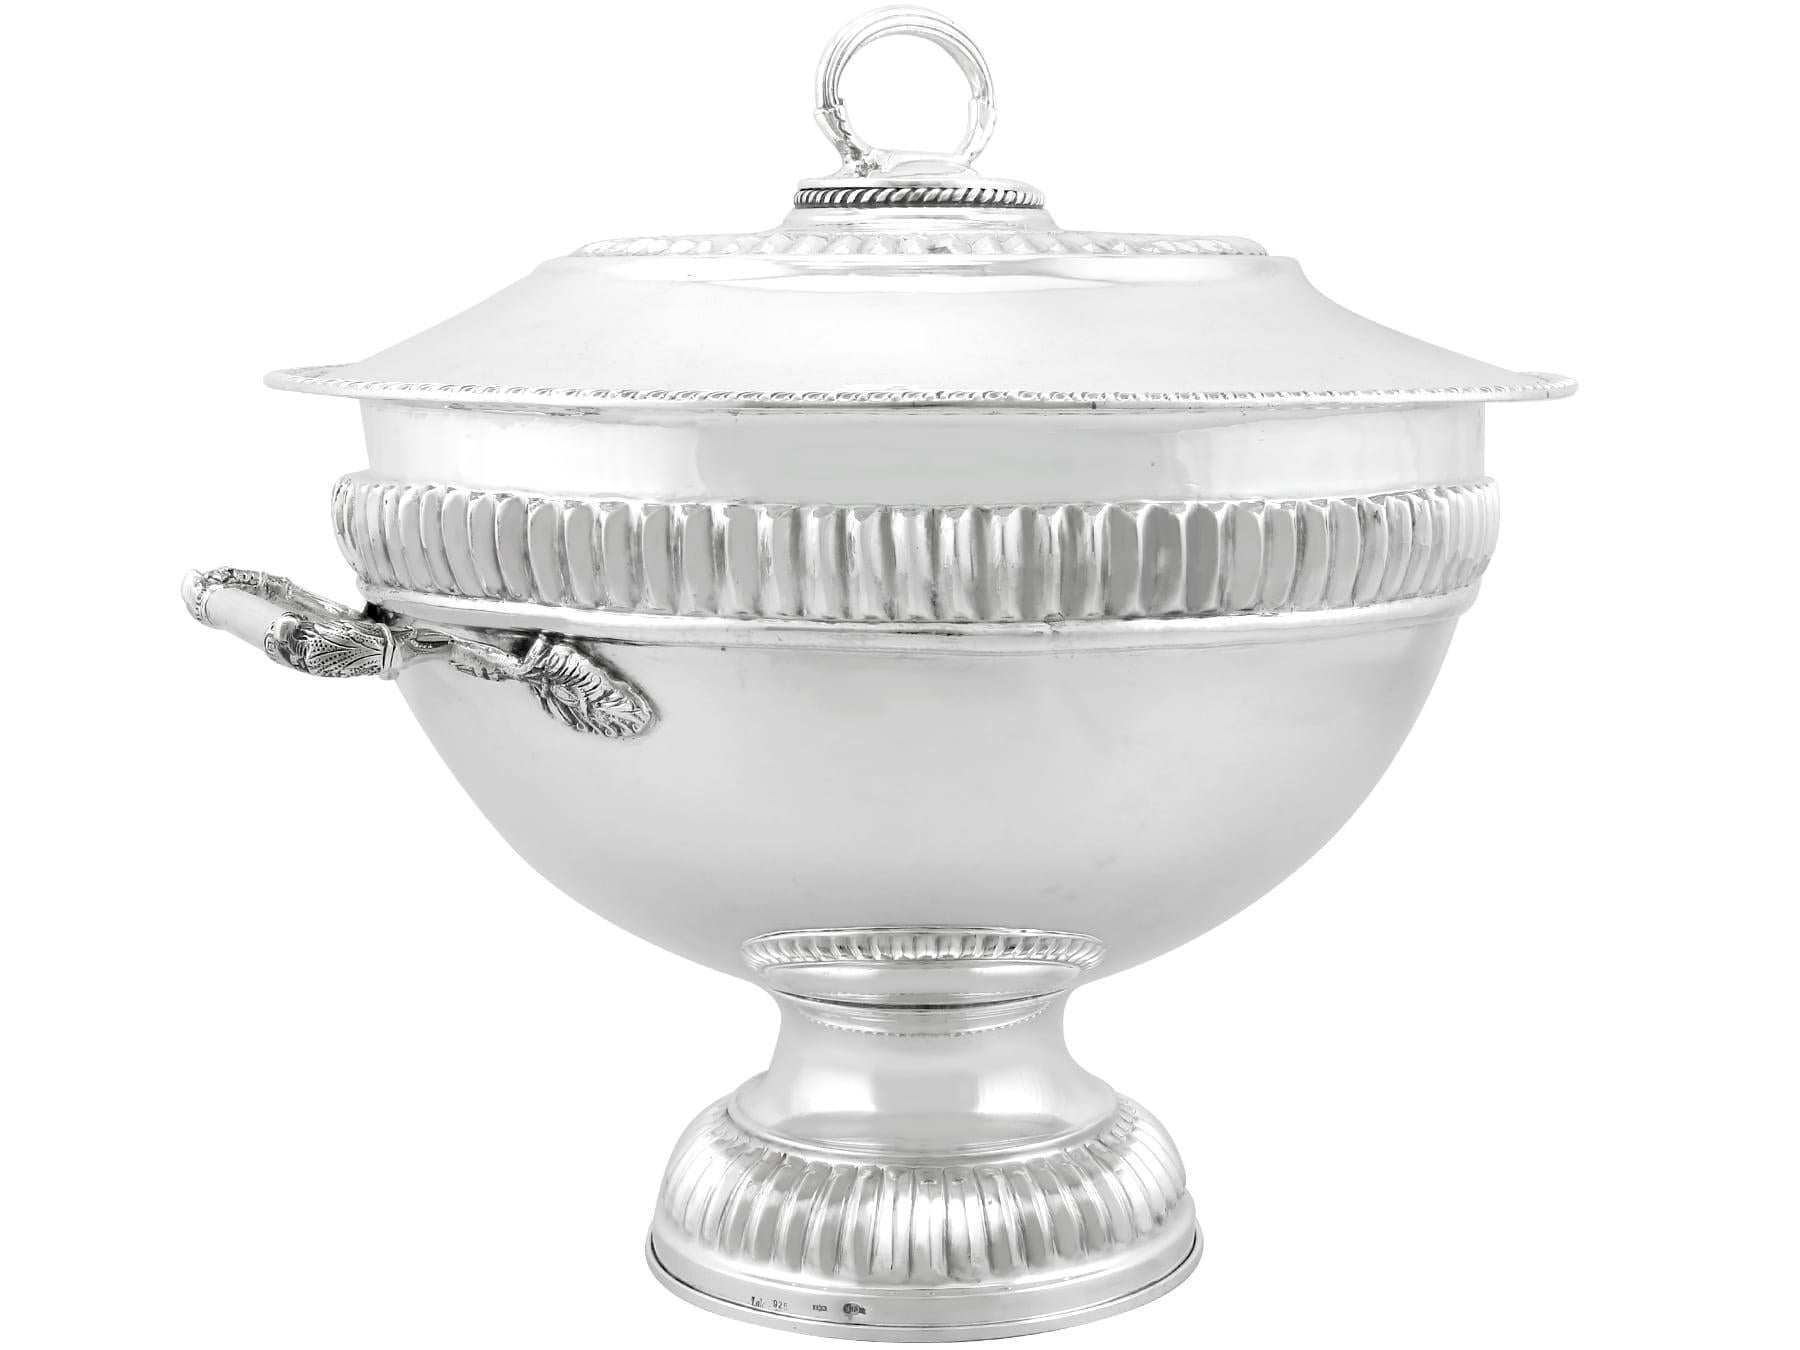 An exceptional, fine and impressive vintage European silver soup tureen; an addition to our silver dining collection.

This exceptional vintage silver tureen has a circular rounded form onto a circular domed spreading foot.

The surface of this